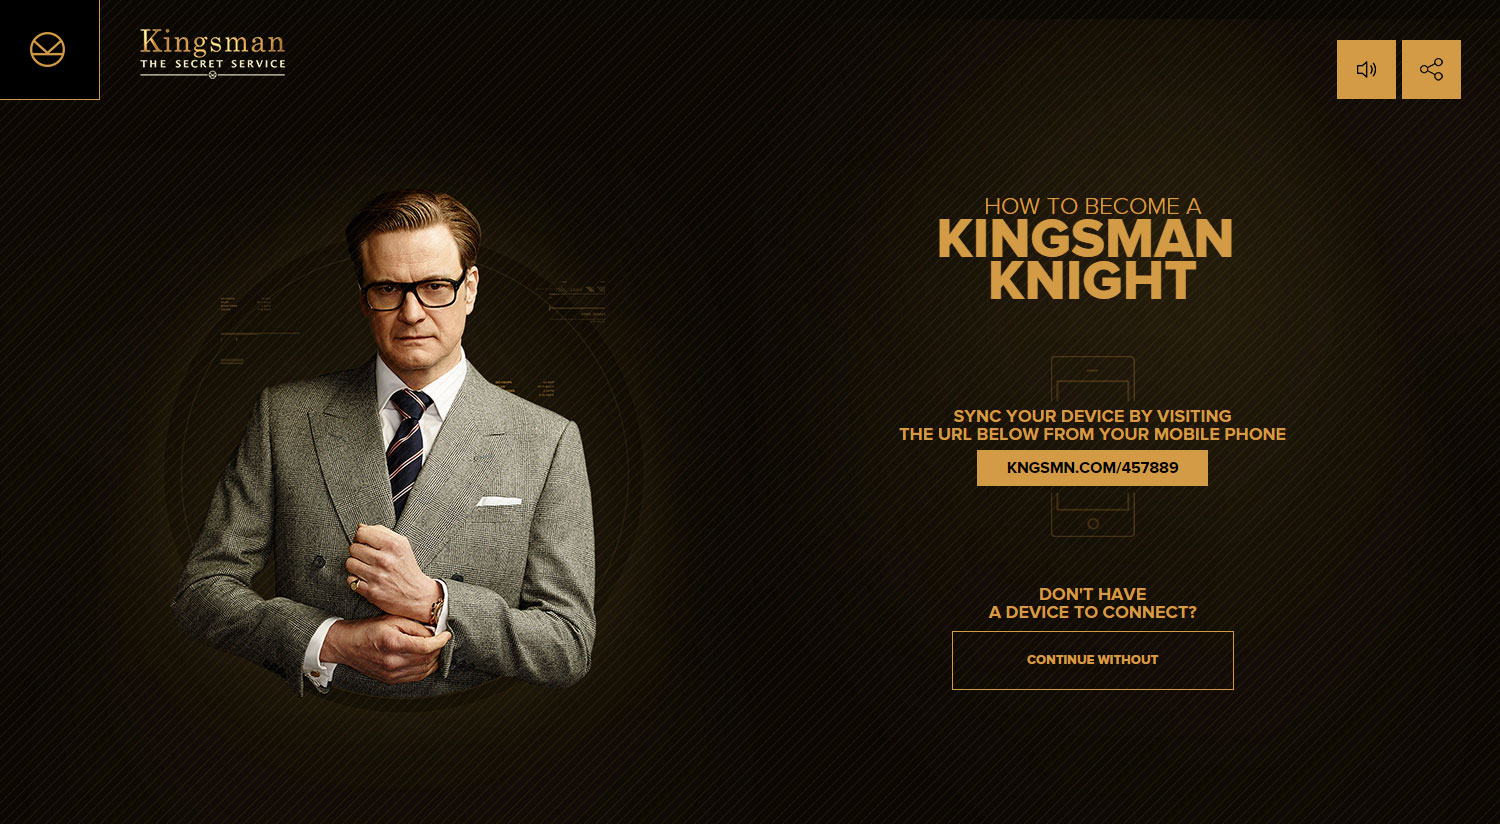 Become a Kingsman - Website of the Day